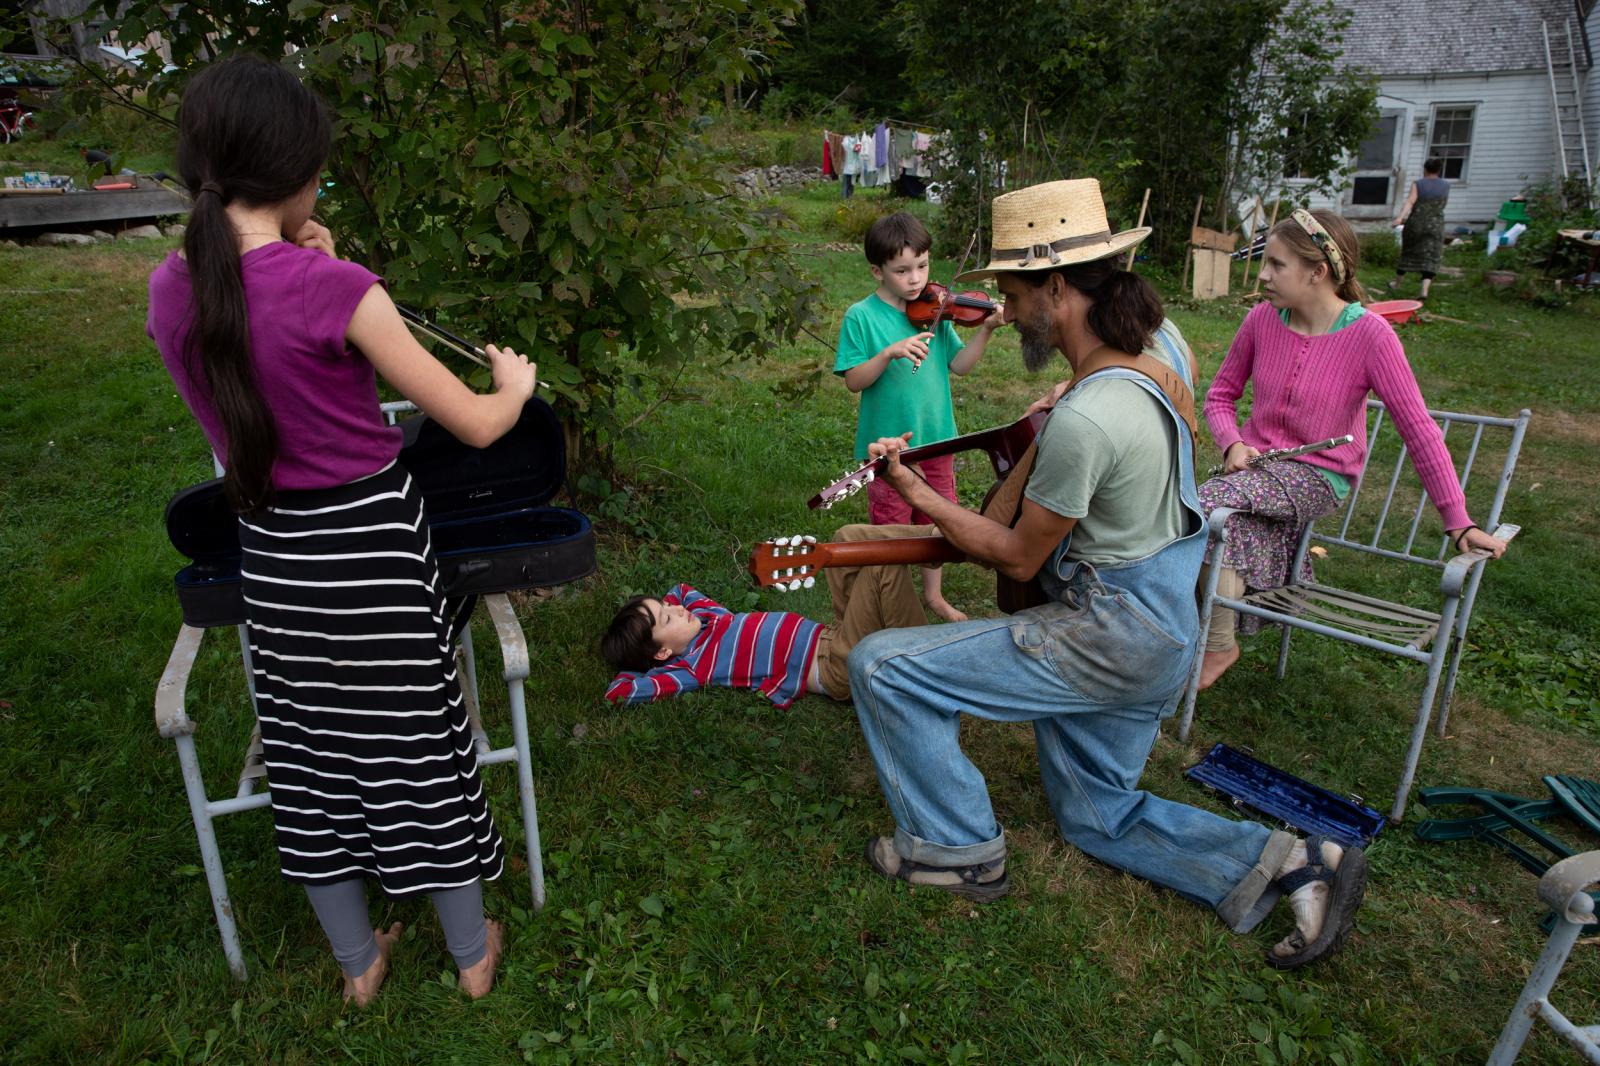 The family gathers together to play music, Bremen, Maine, 2014.